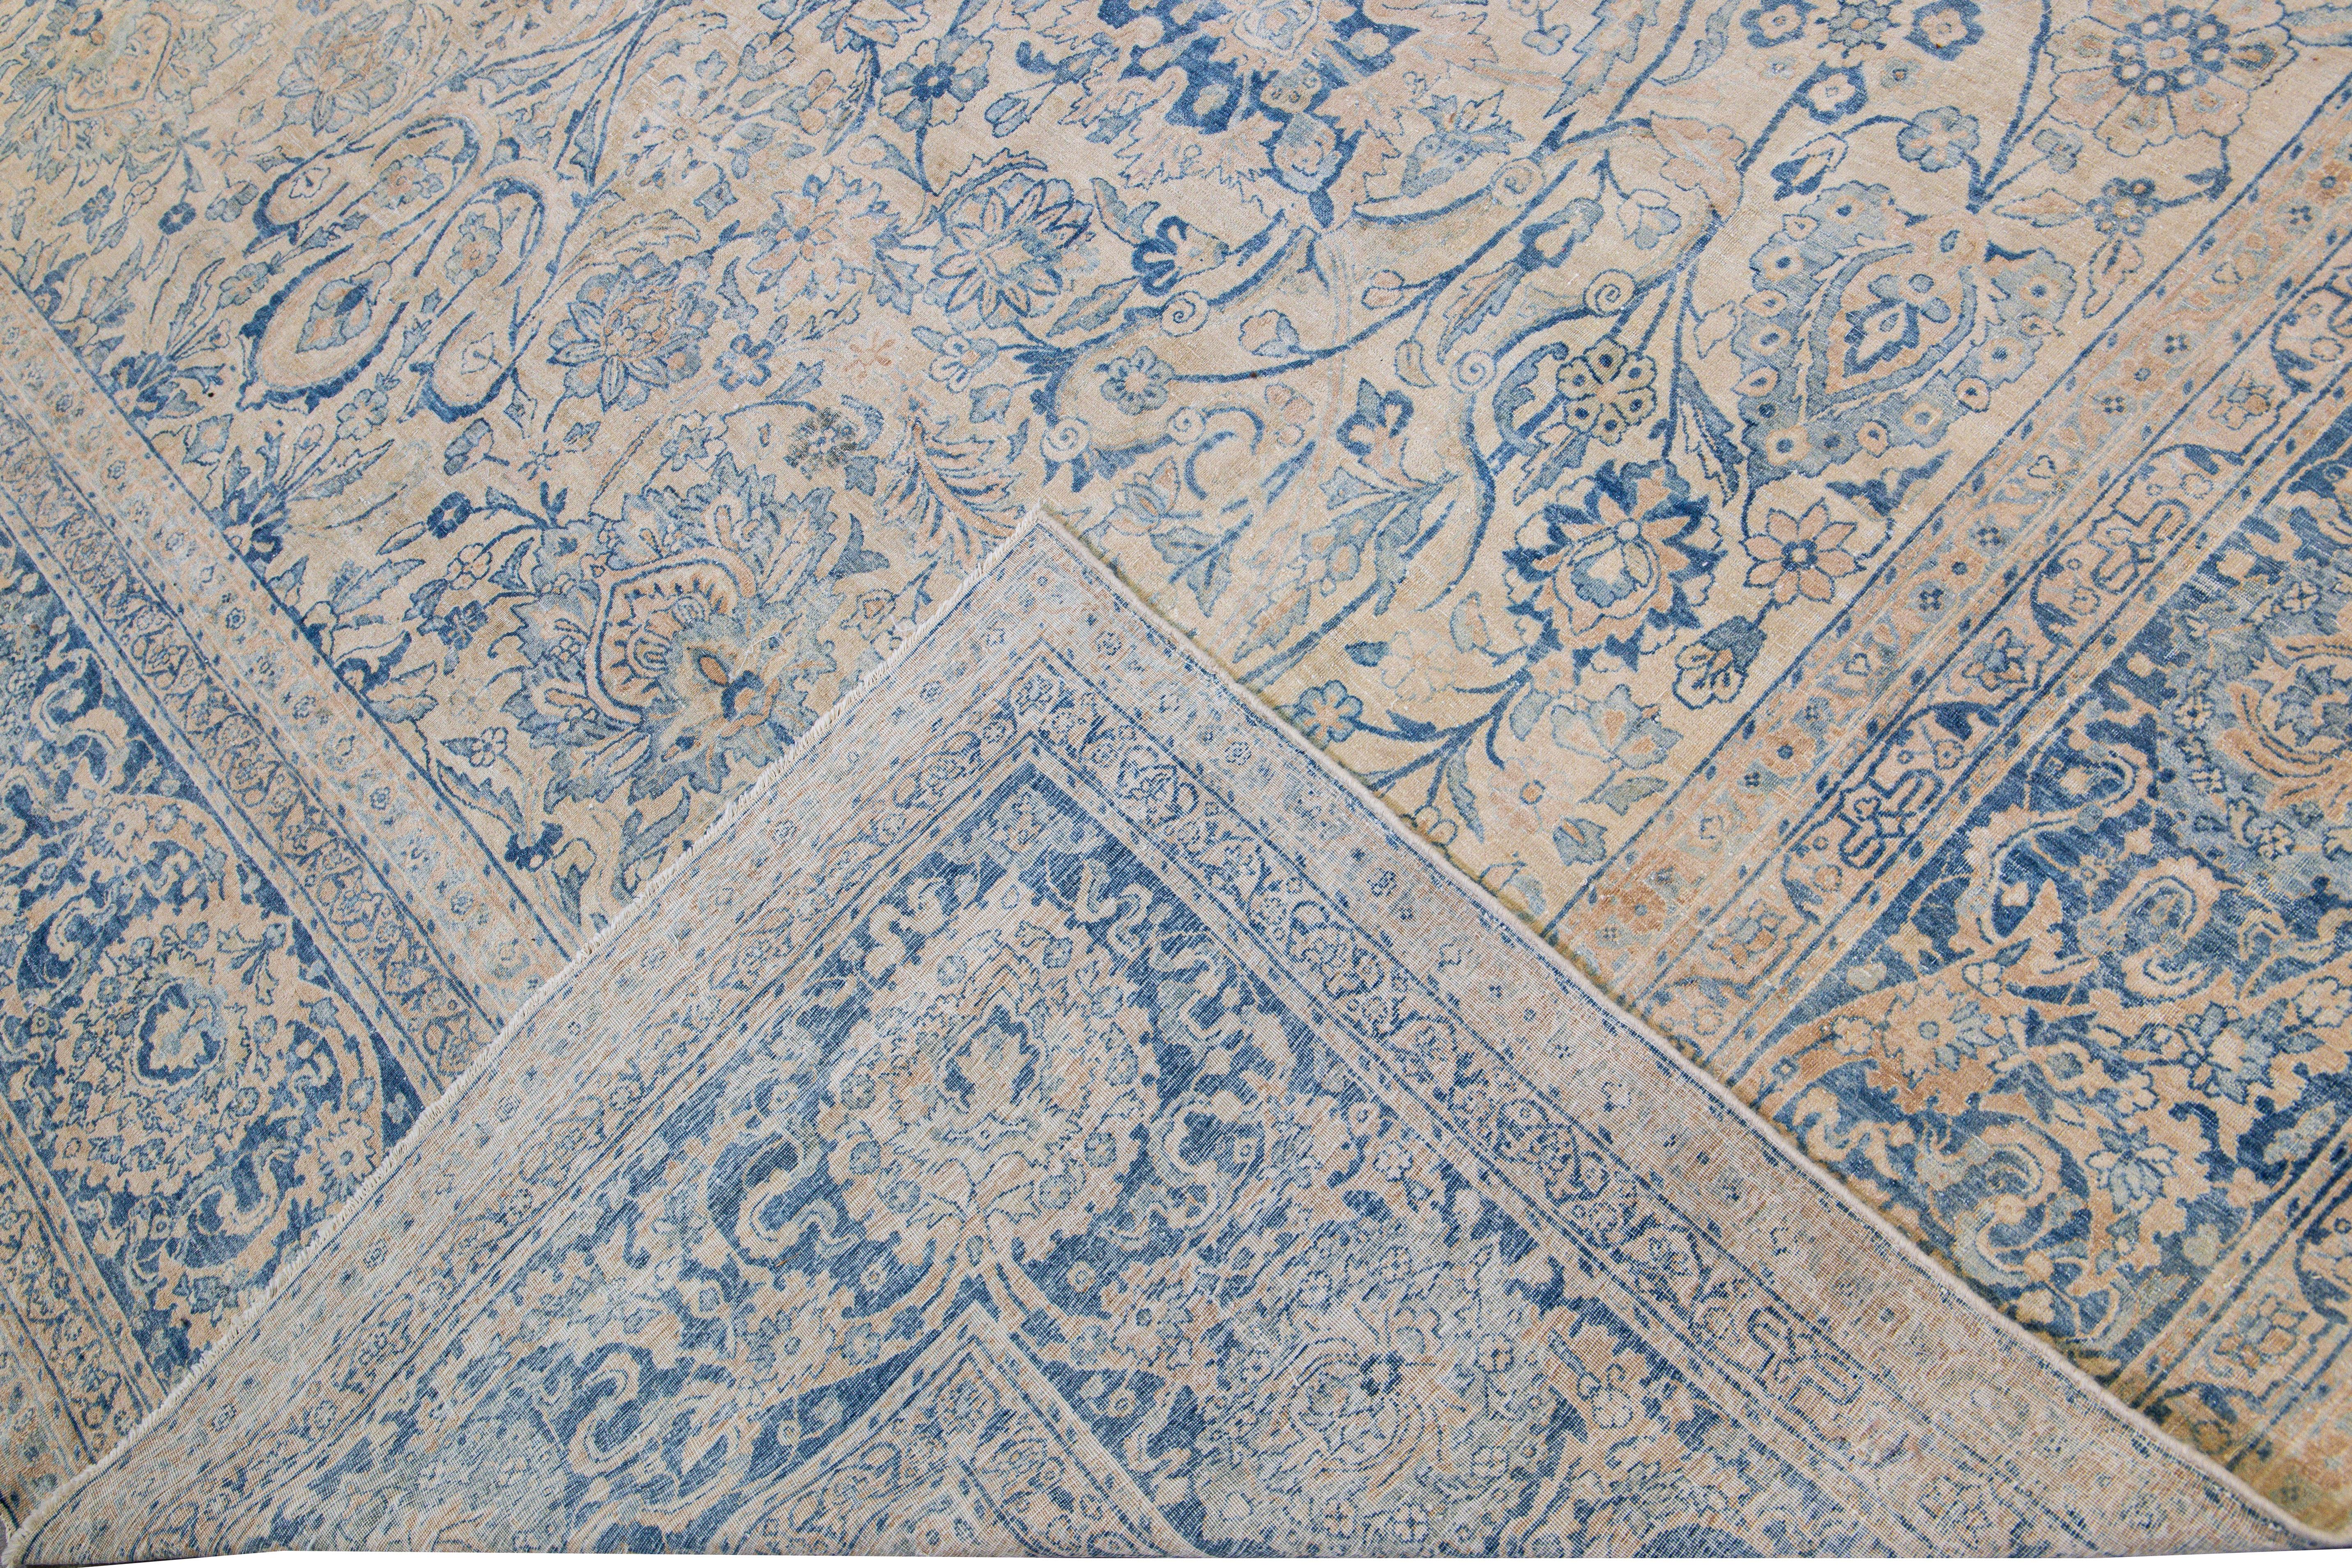 Beautiful antique Oversize Kerman hand-knotted wool rug with a beige field. This Kerman rug has a blue frame and accent that features an all-over botanical pattern design.

This rug measures: 12'7